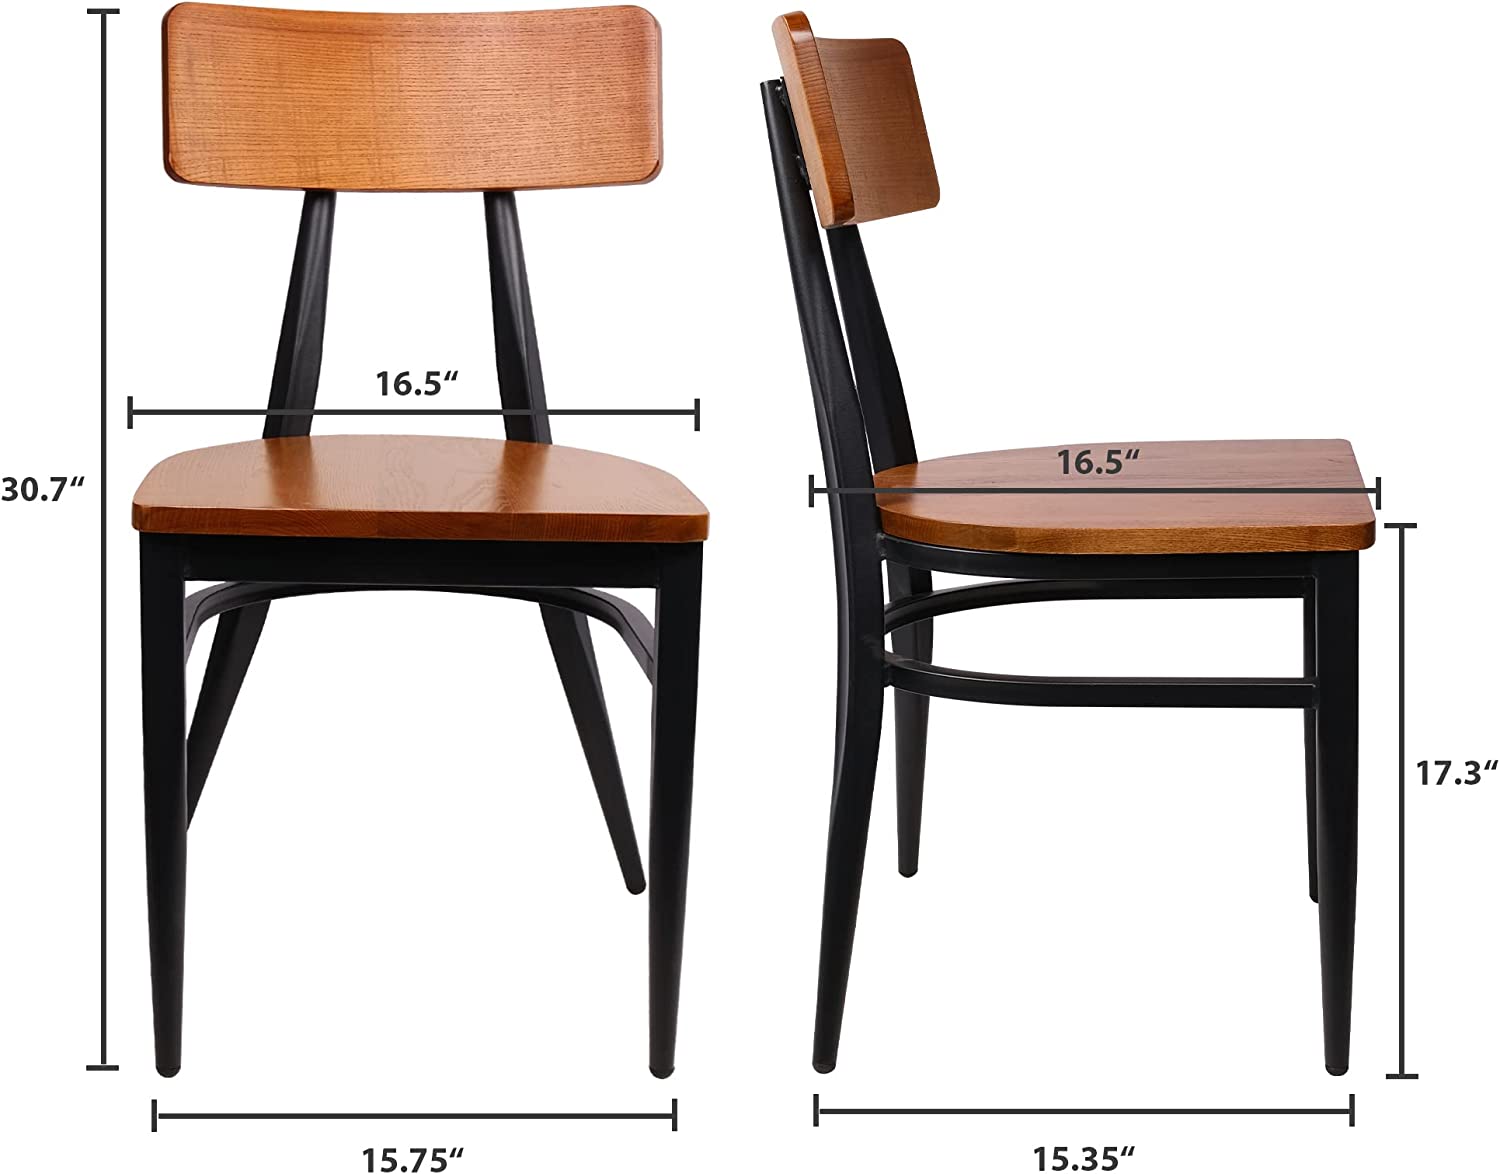 Modern Industrial Kitchen Dining Chairs Set of 2 with Solid Wooden Seat & Metal Legs